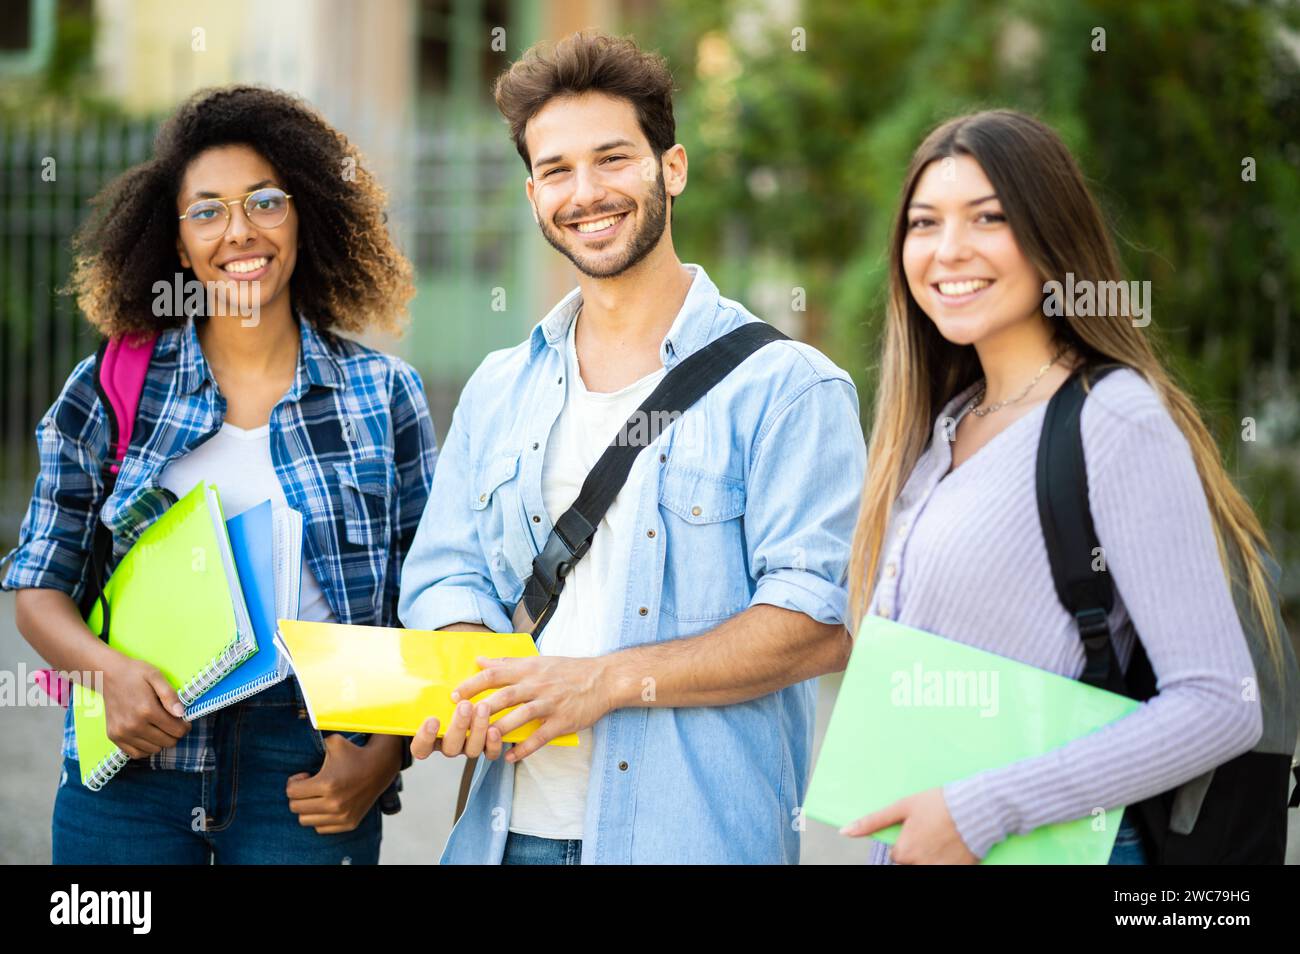 Happy multiethnic group of students smiling outdoor Stock Photo